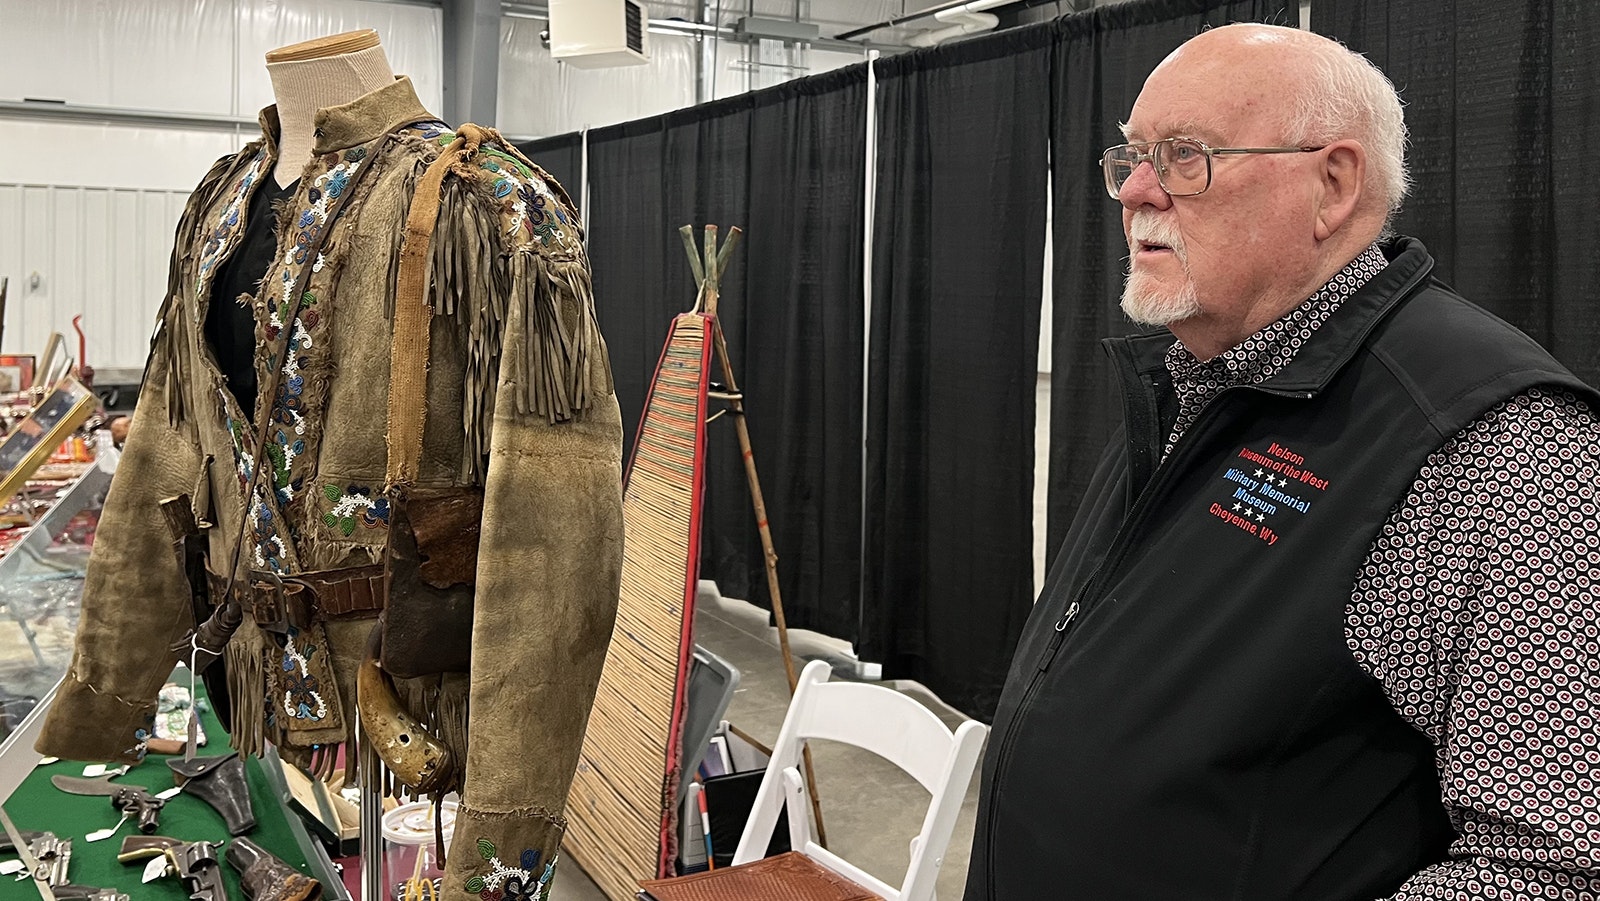 Bob Nelson of Cheyenne was asking $3,000 for this authentic 19th century buckskin Indian scout’s jacket at the New Frontier Gun Show and Western Collectibles Show in Cheyenne.